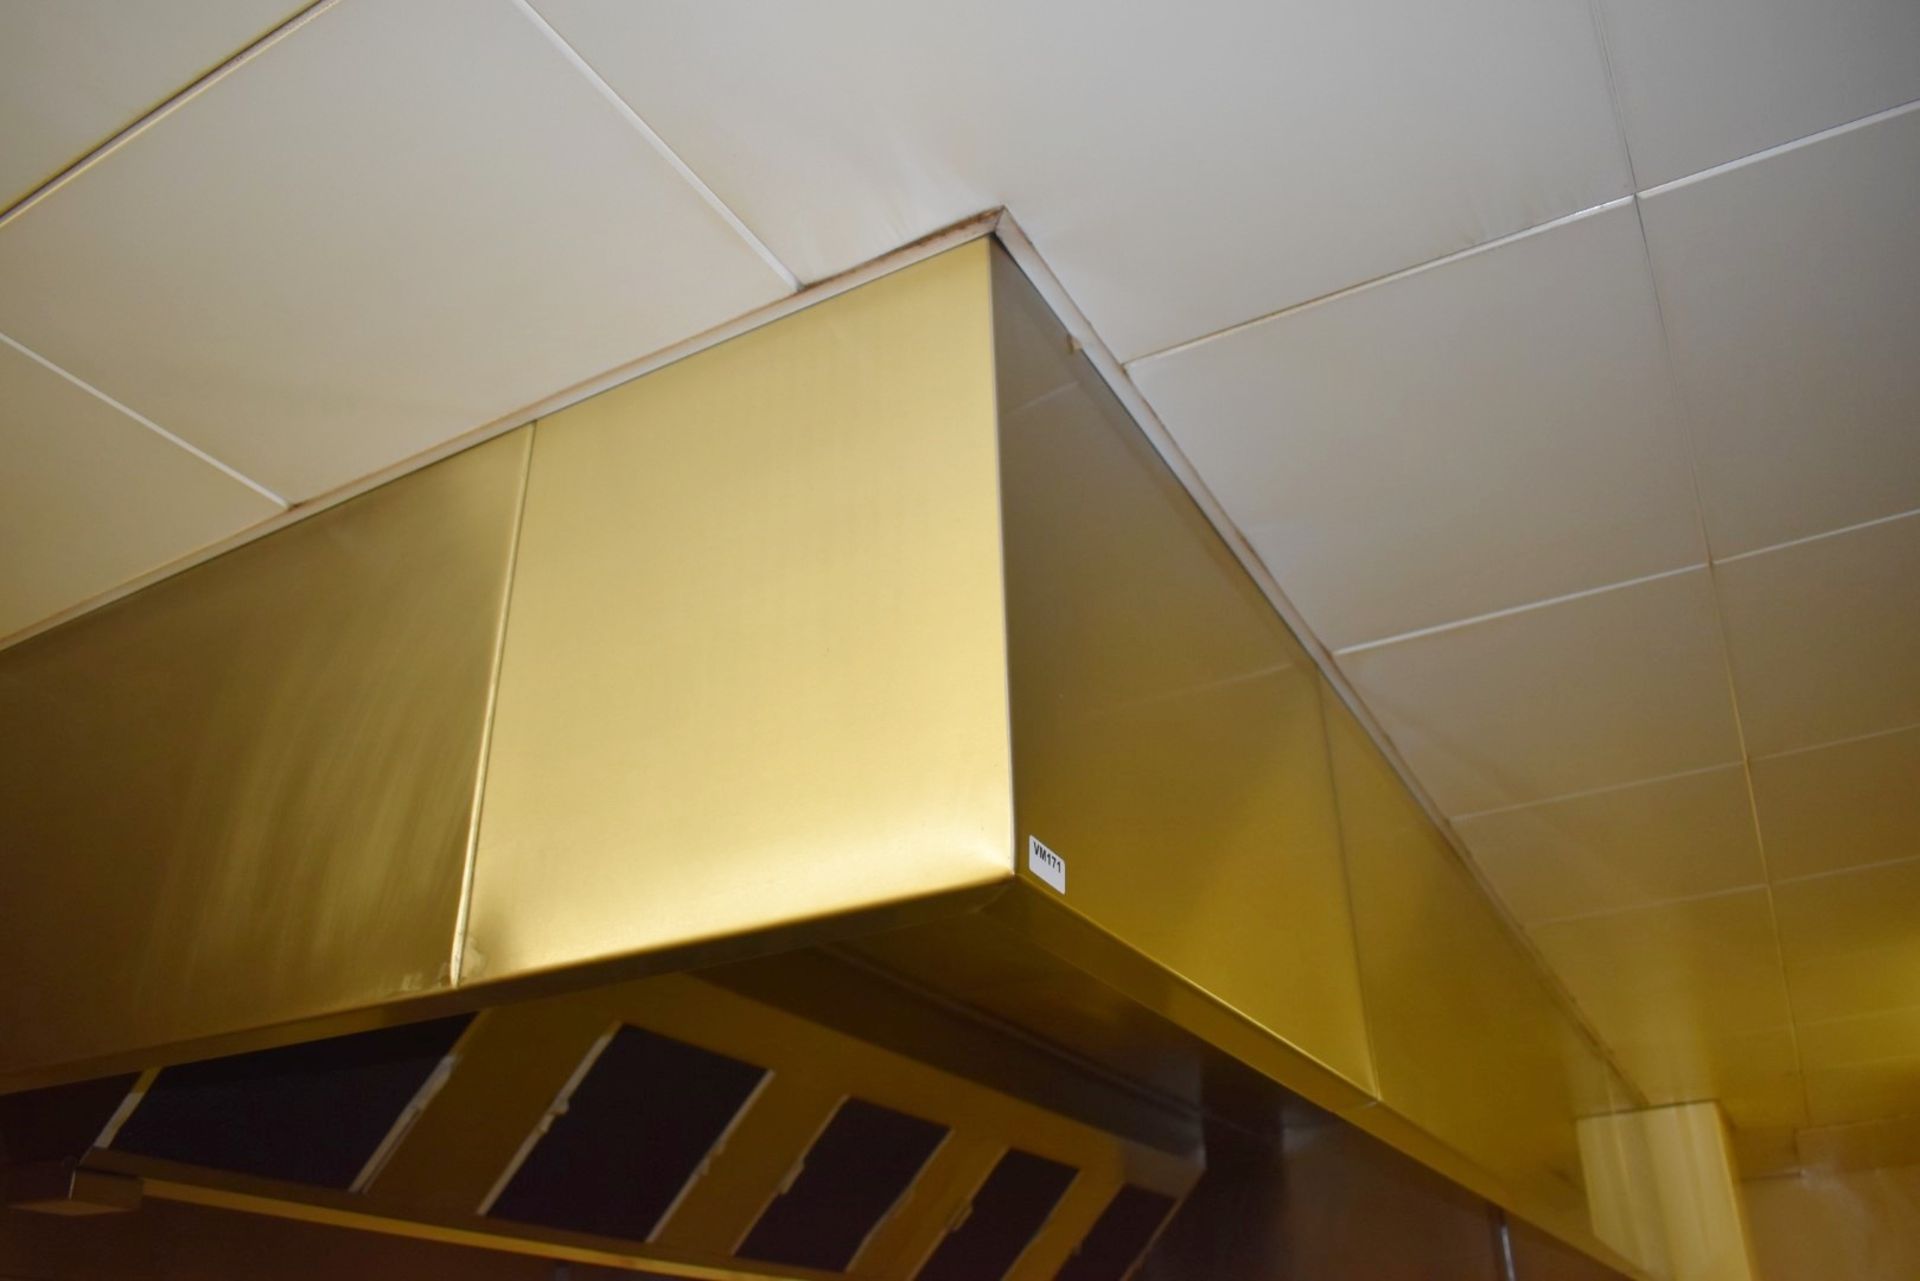 1 x Commerical Kitchen Ceiling Mounted Extractor Hood - Stainless Steel - Breaks into Multiple Parts - Image 5 of 17